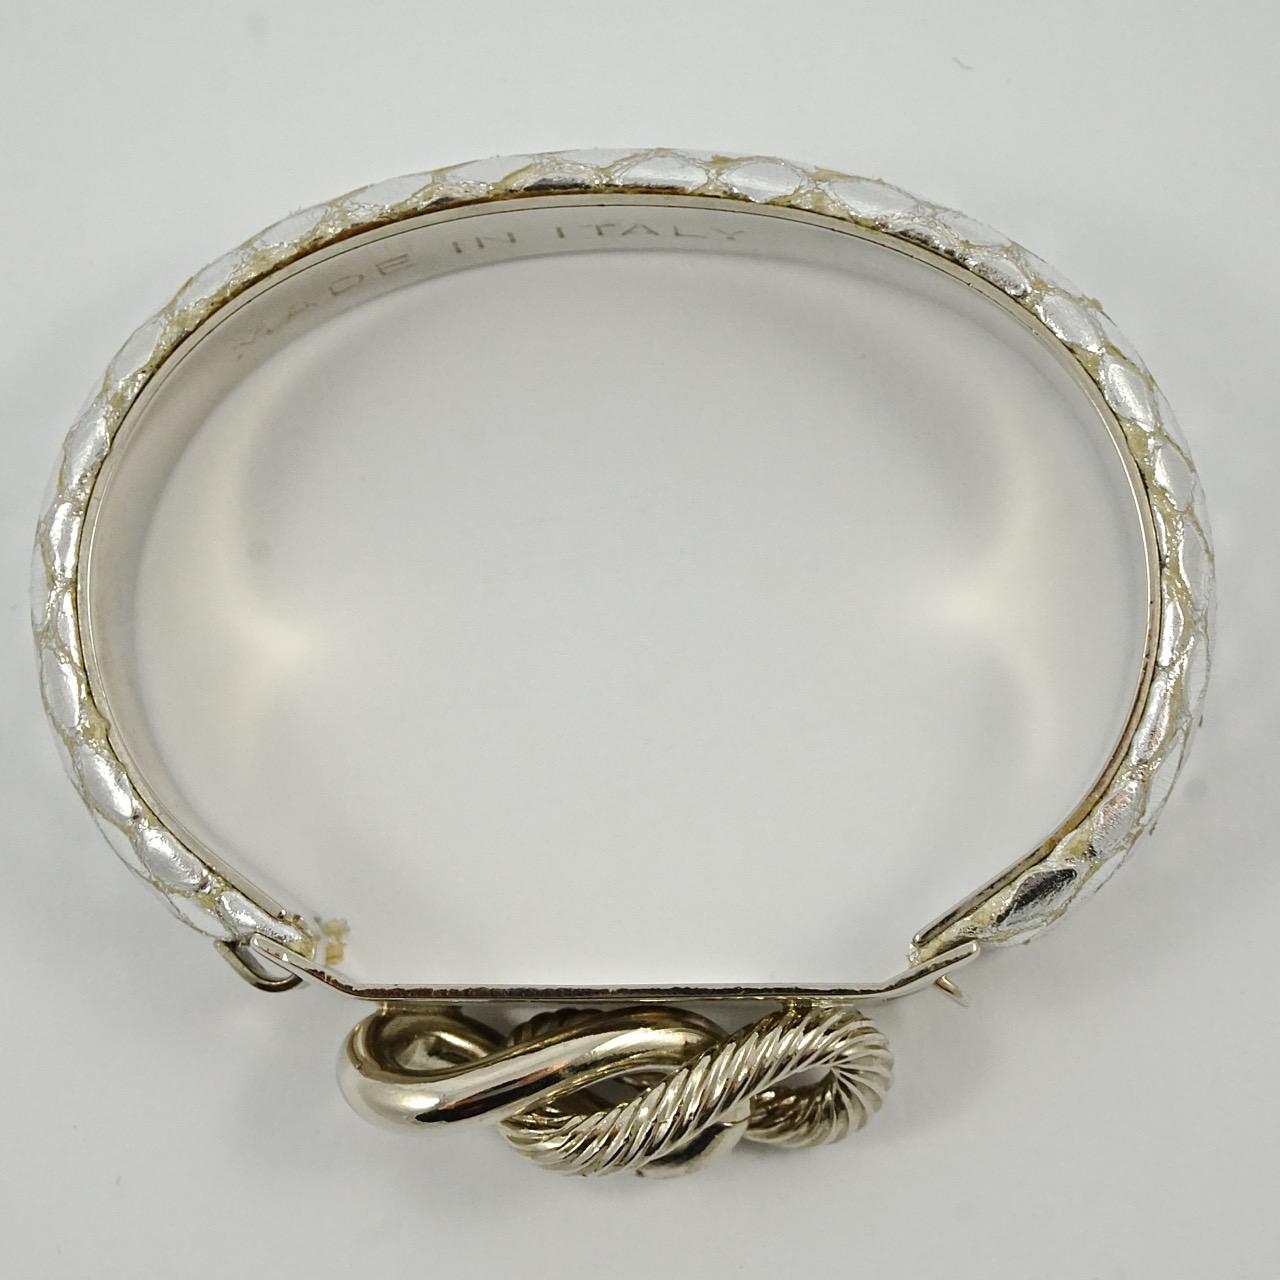 Women's or Men's Pair of Silver and Grey Leather Lizard Design Bangle Bracelets Made in Italy